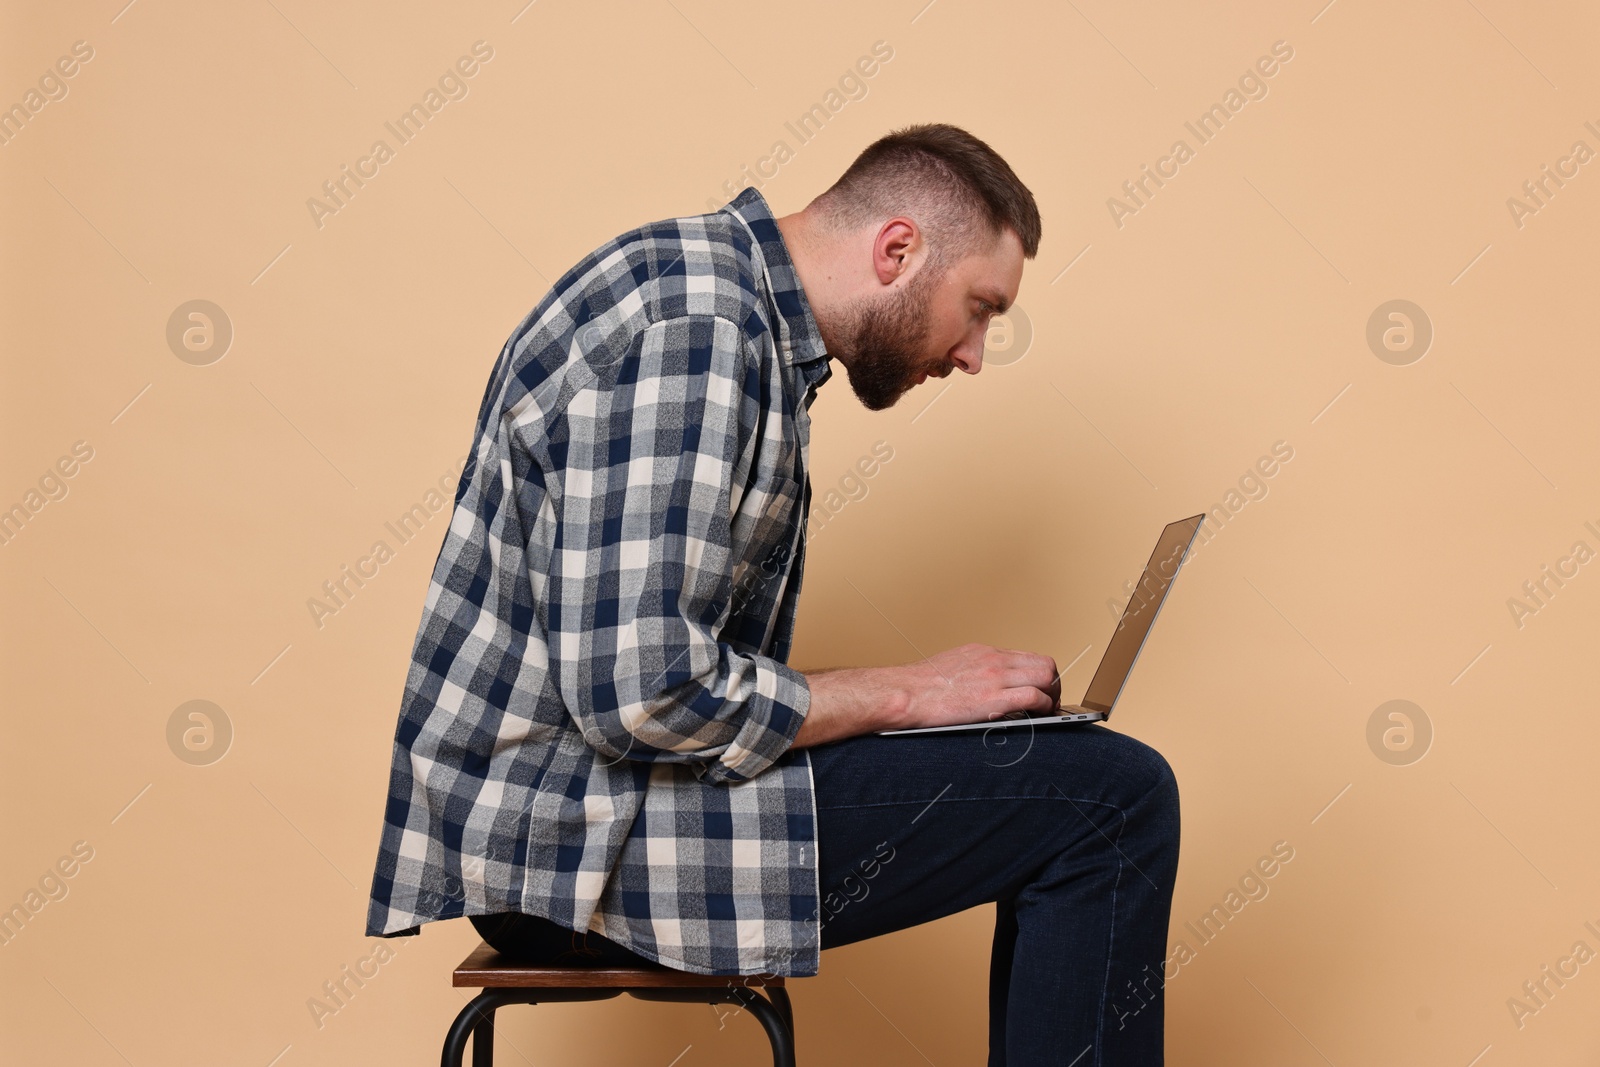 Photo of Man with poor posture sitting on chair and using laptop against pale orange background